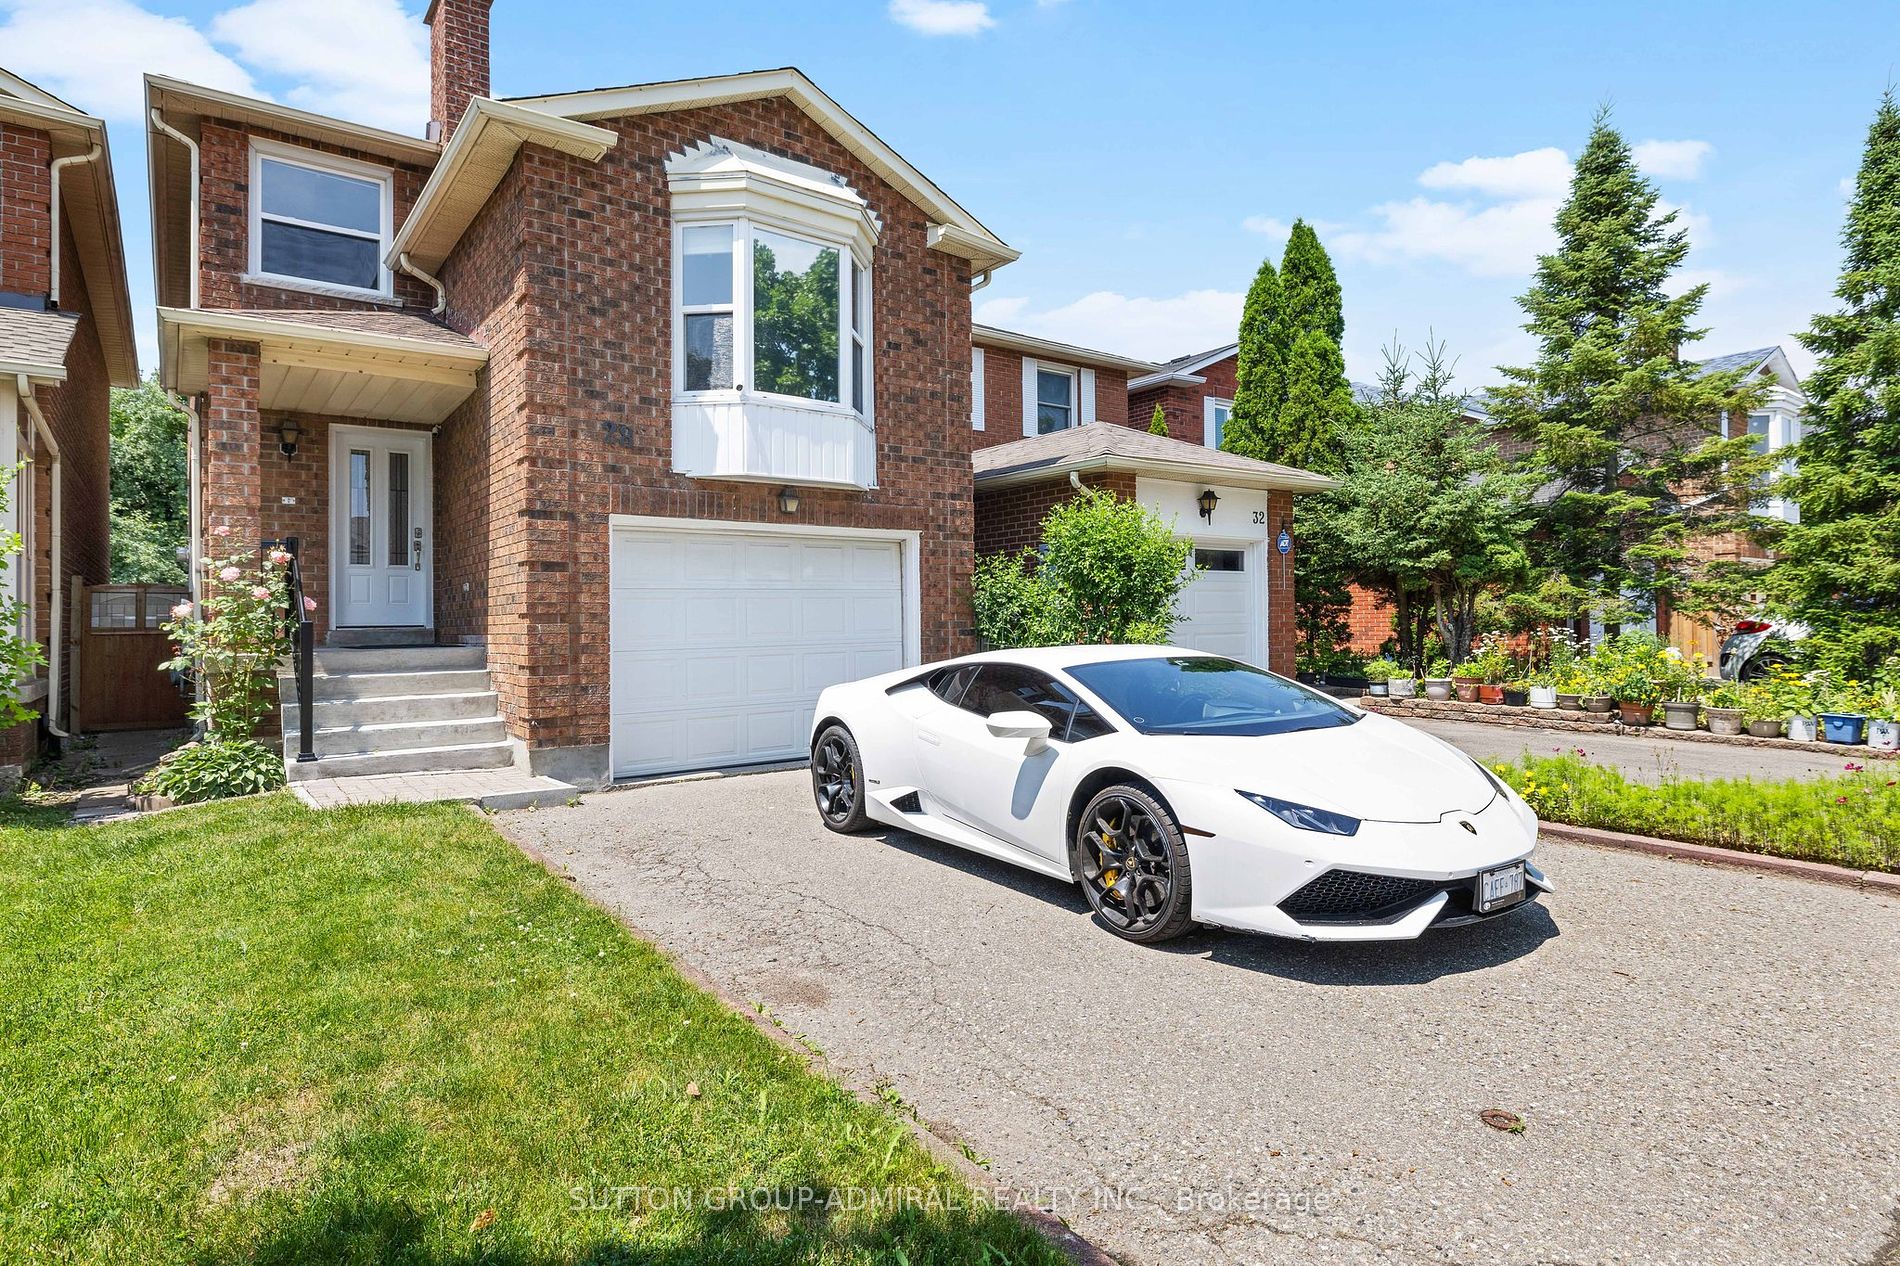 Detached house for sale at 28 White Blvd Vaughan Ontario